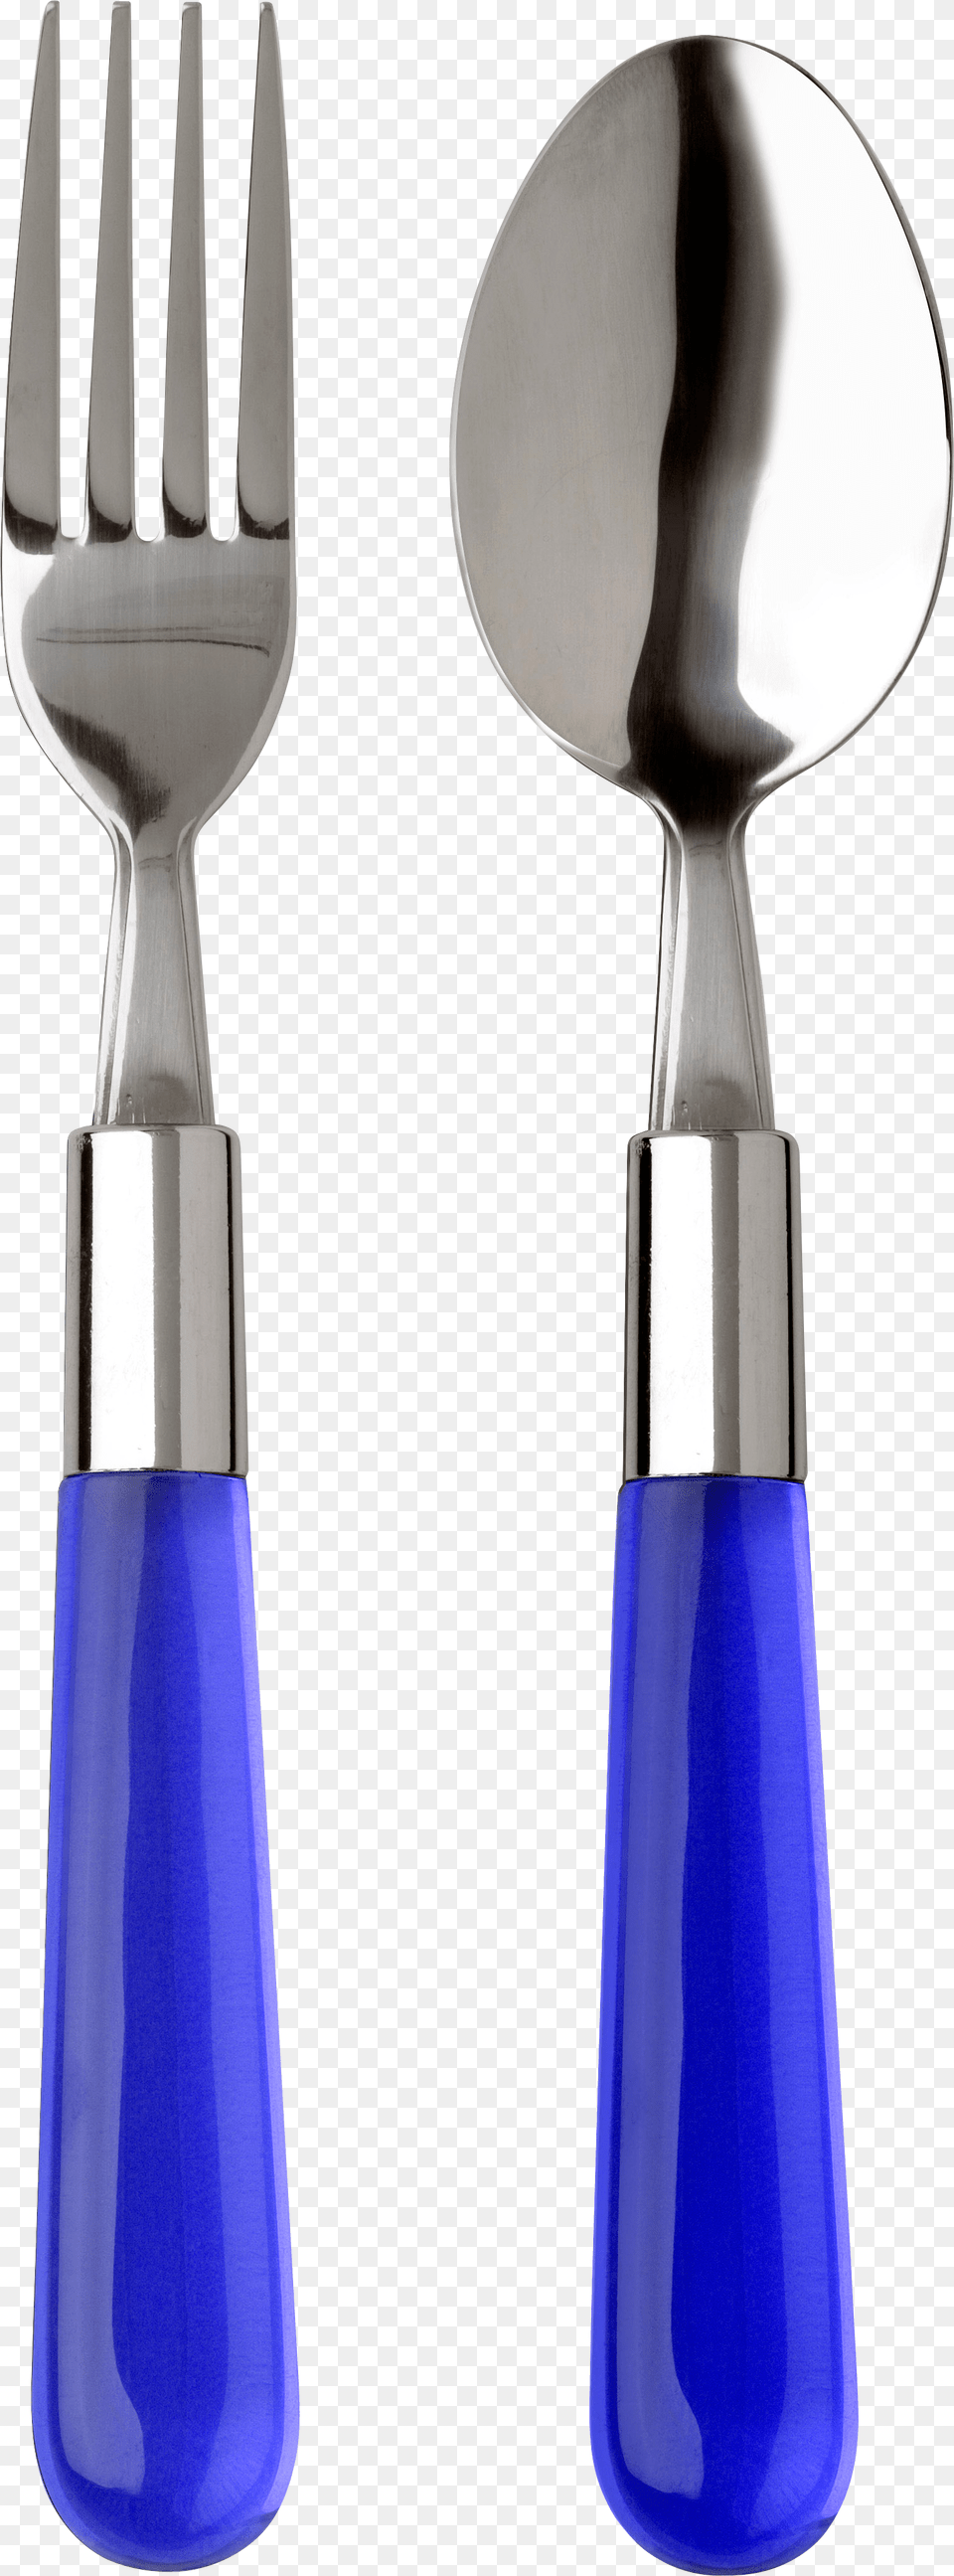 Fork And Spoon Images Lozhka Vilka, Cutlery Png Image